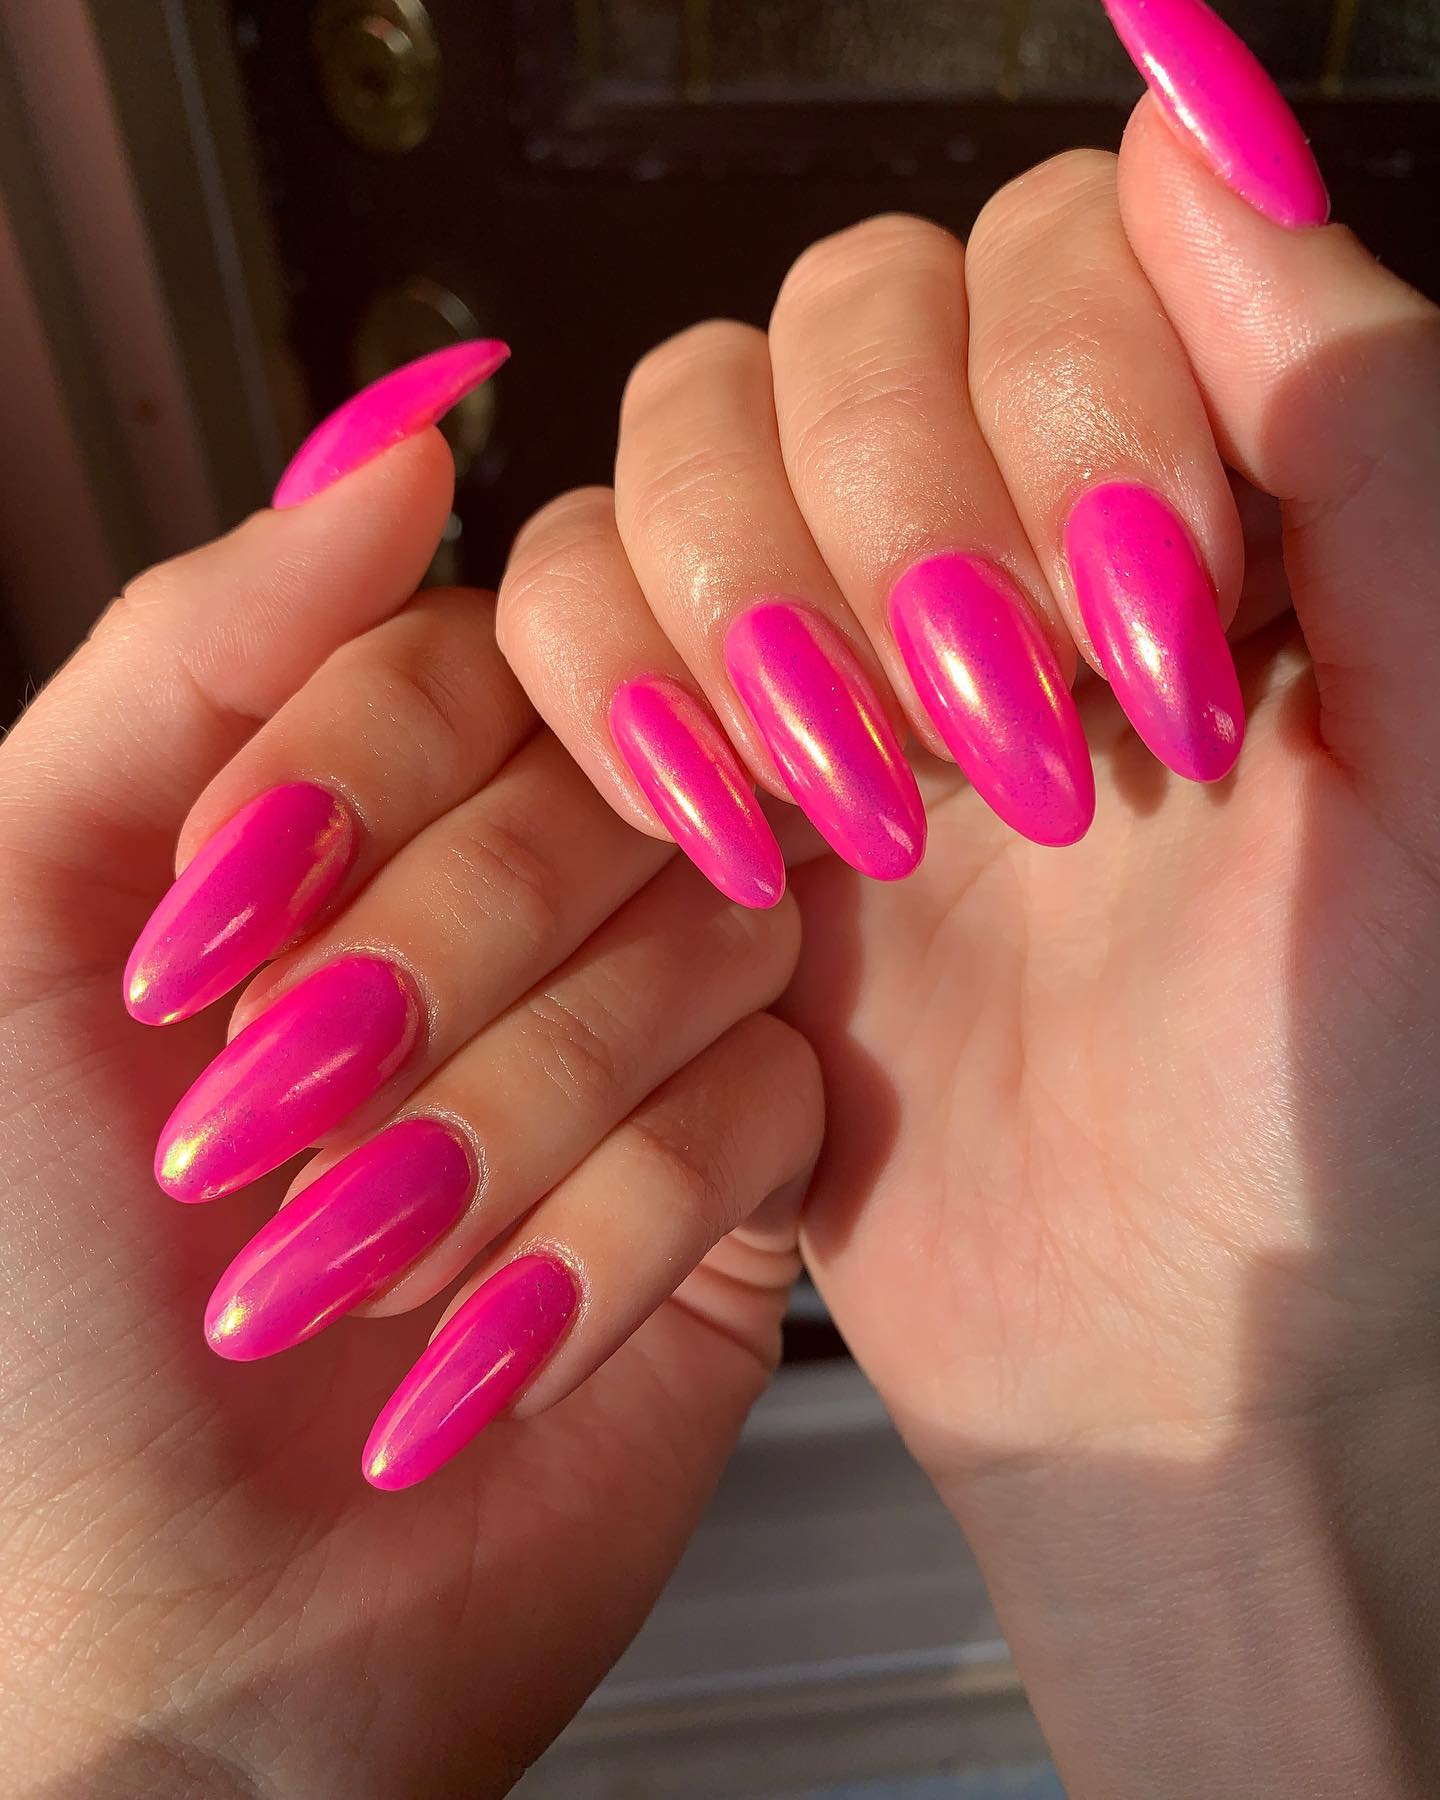  Cute and adorable! This look is for those who want to feel the Barbie vibe to its fullest.